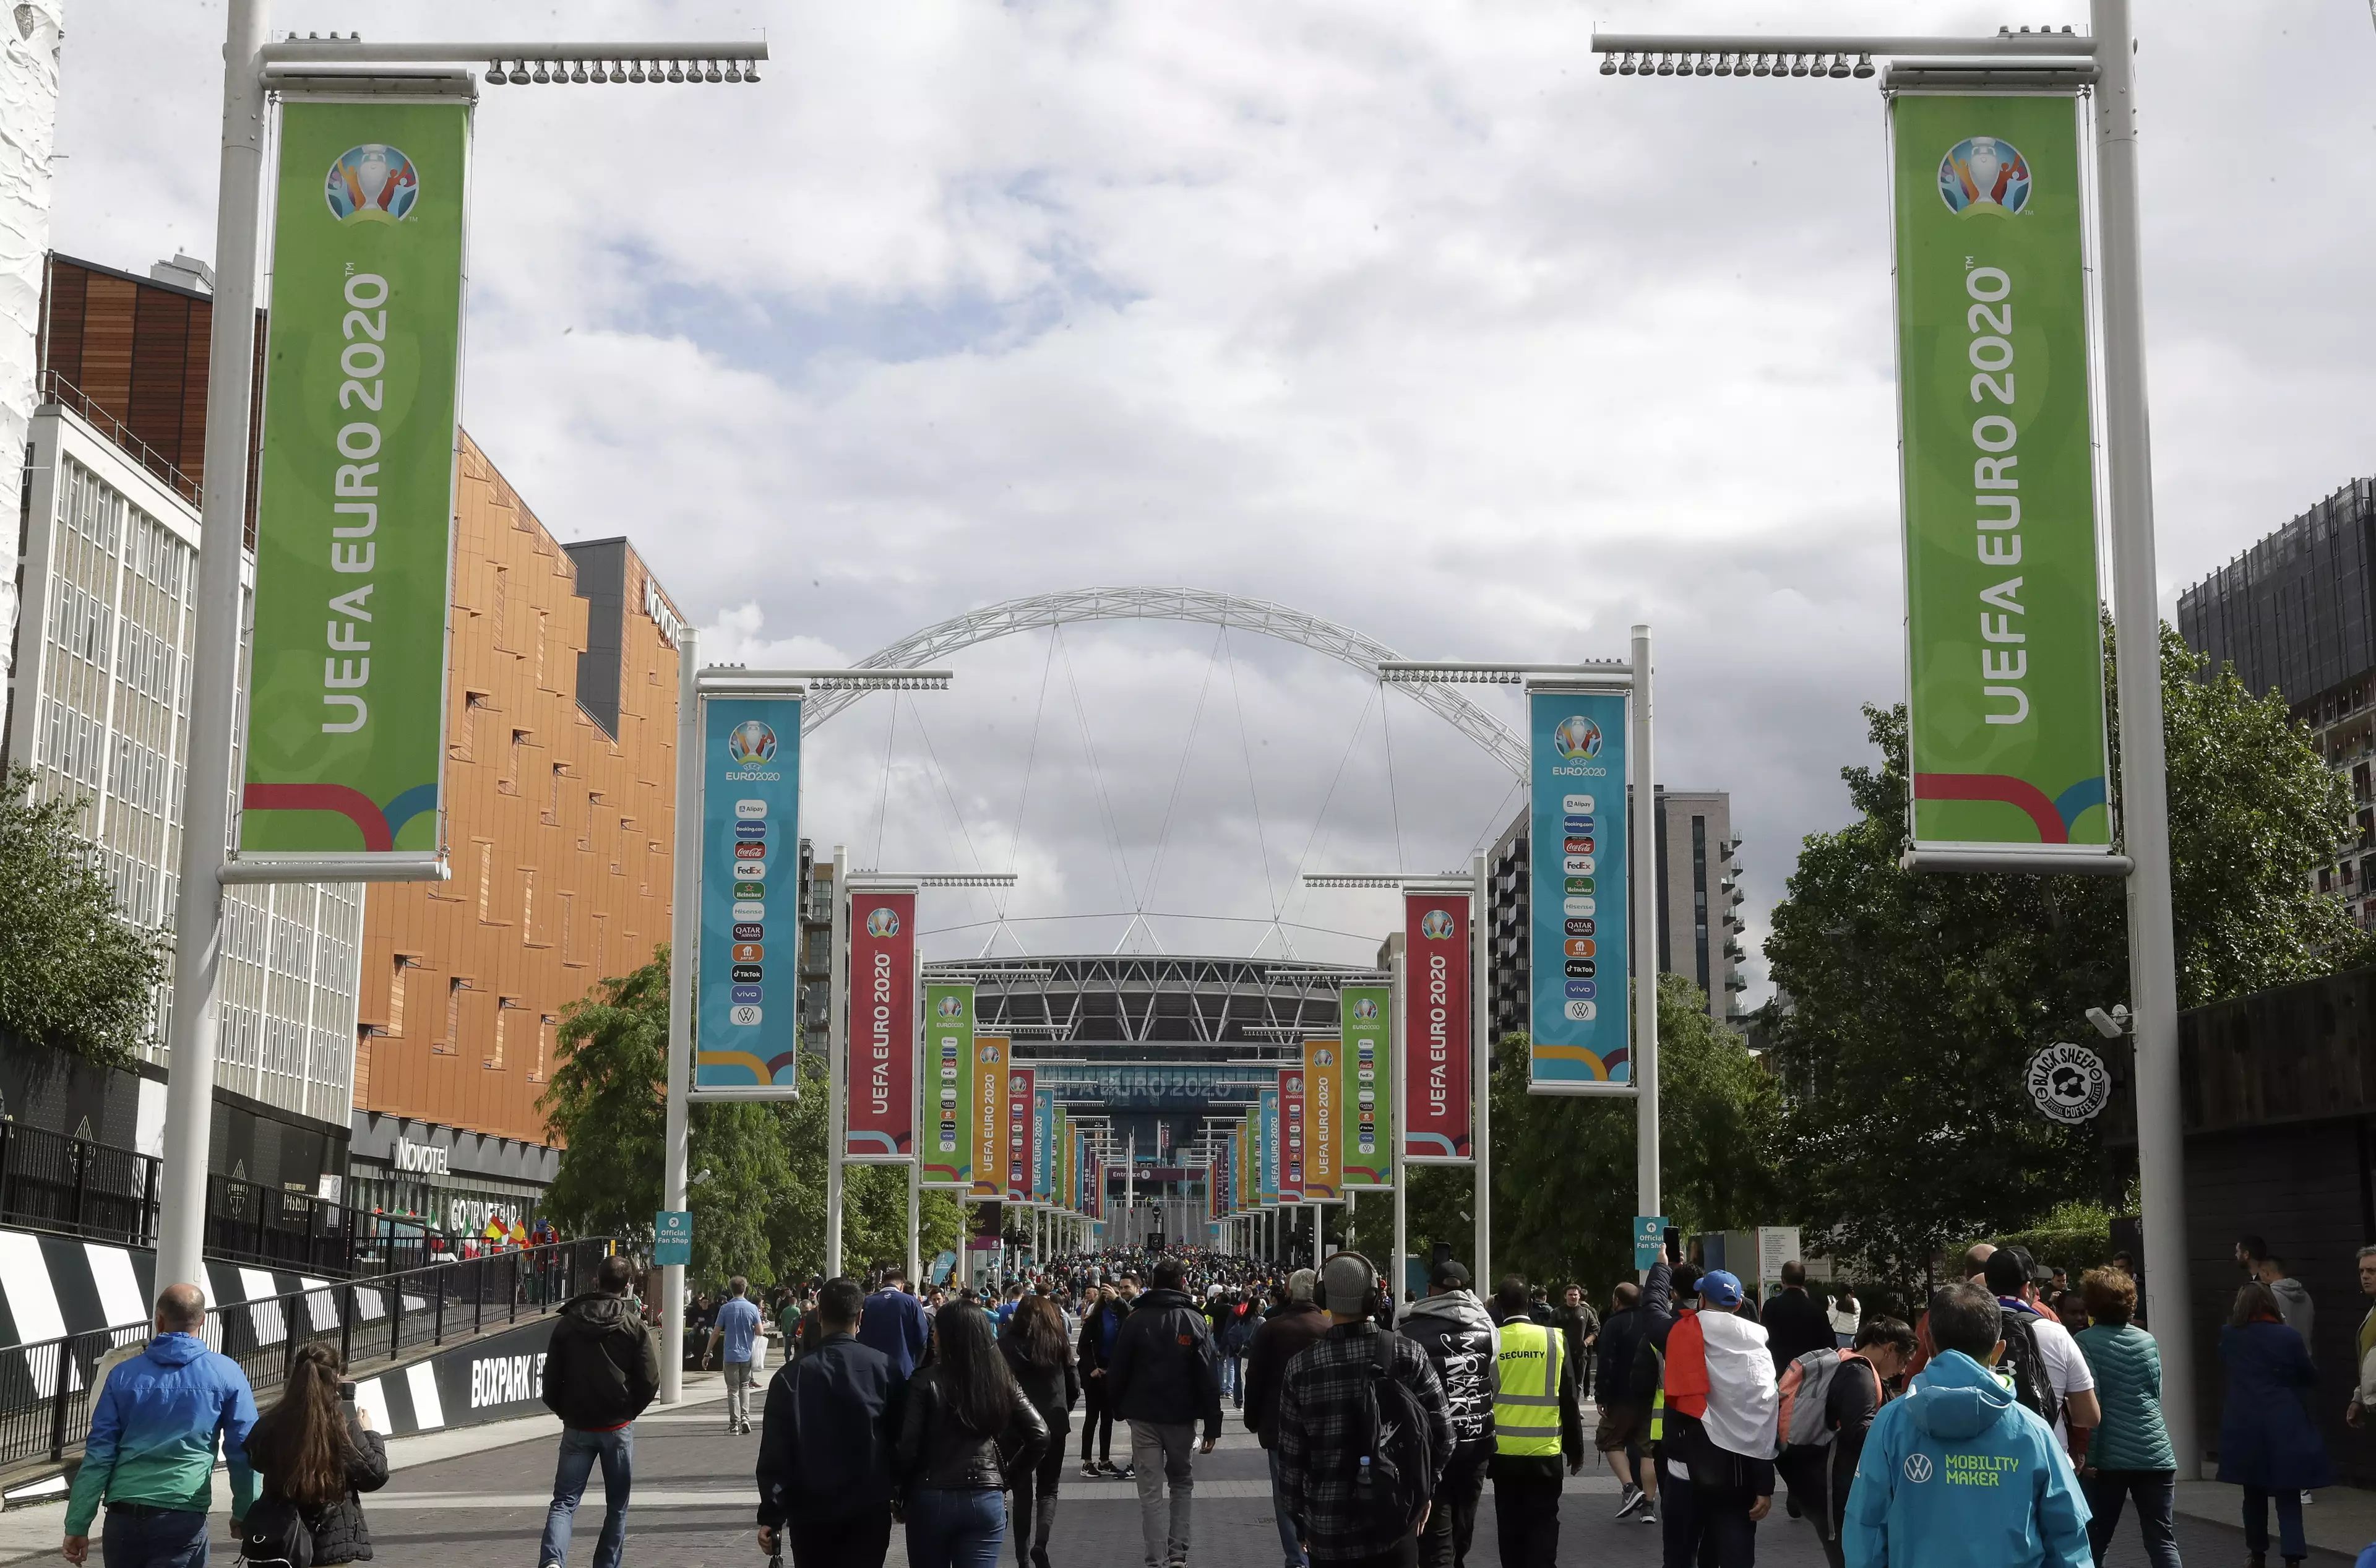 The match will take place at Wembley (